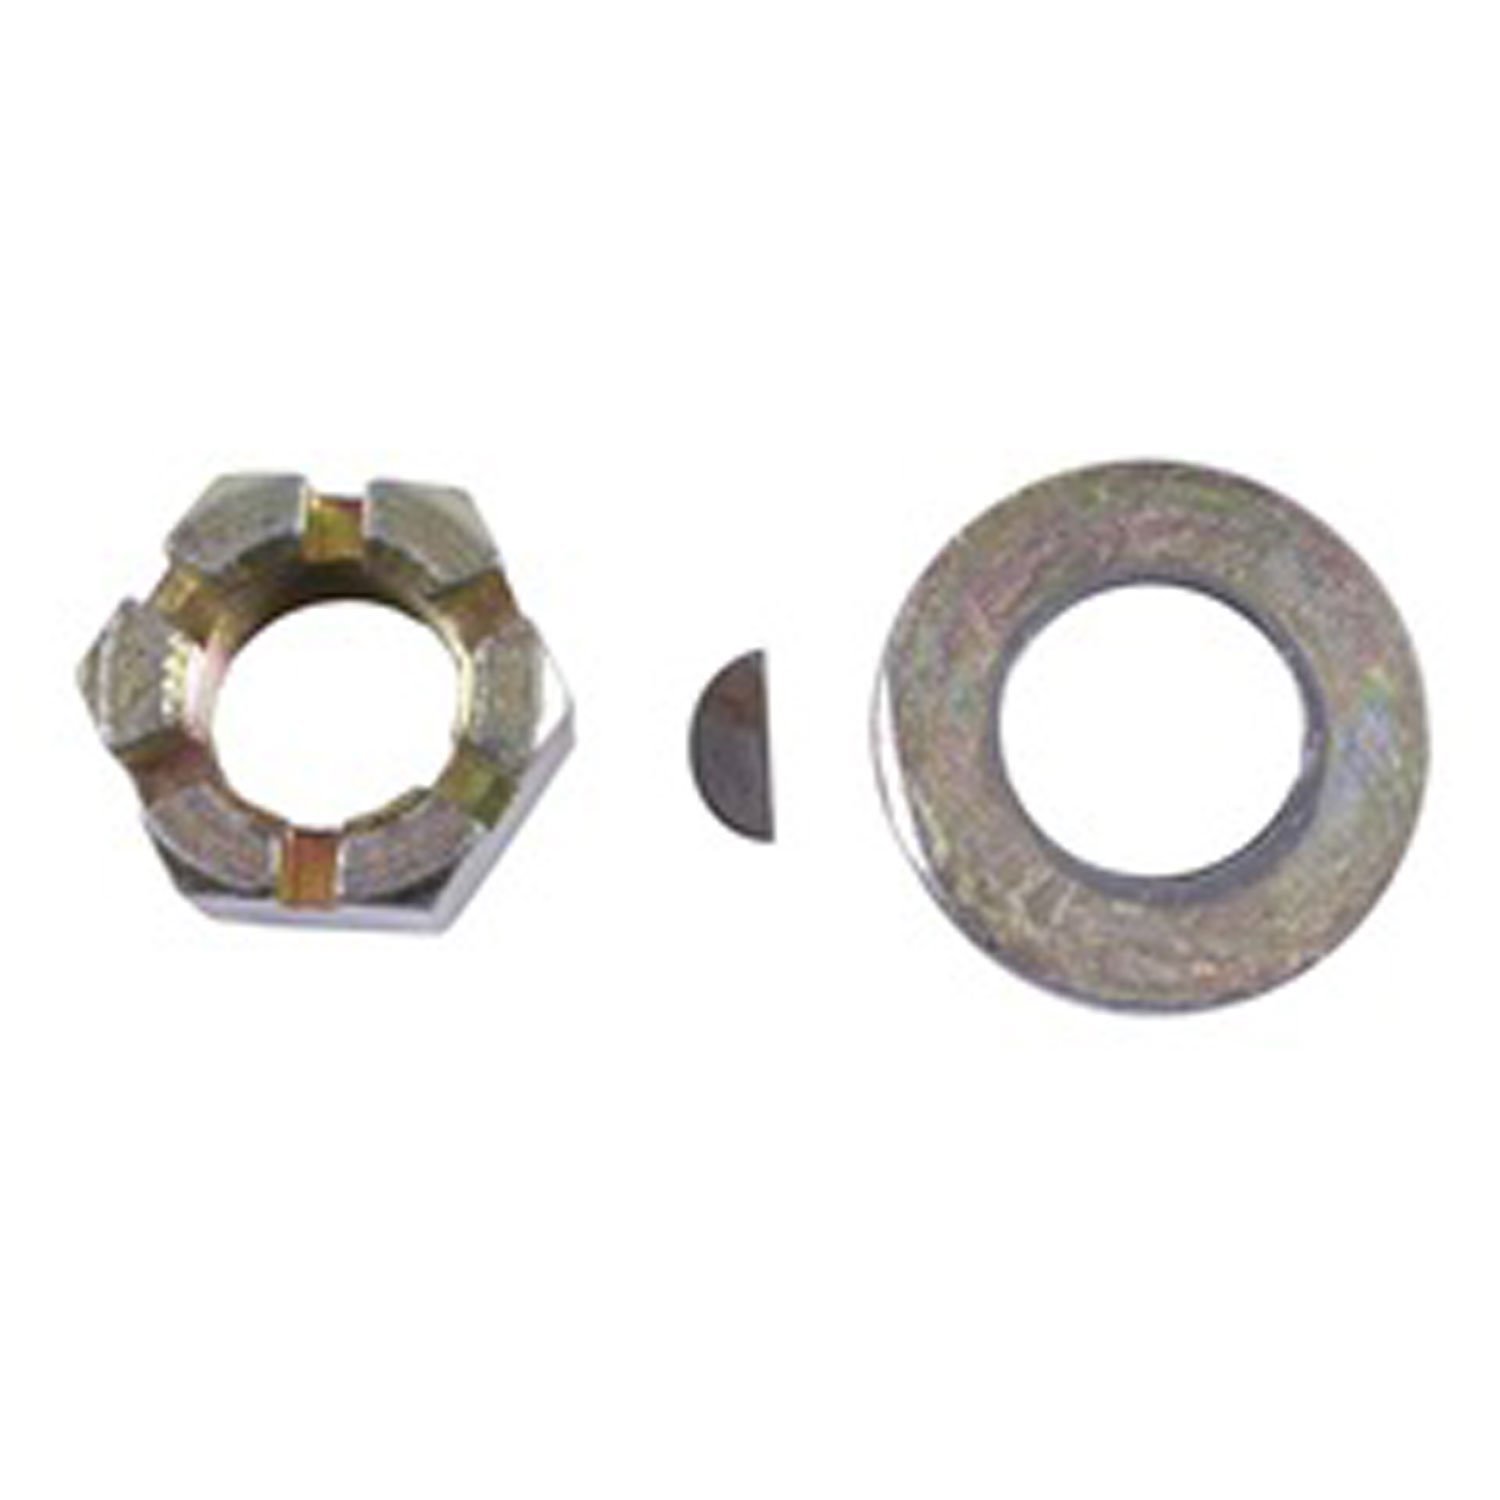 This axle shaft nut washer and key from Omix-ADA fits 76-86 Jeep CJ models with an AMC 20 rear axle. Fits left or right side.